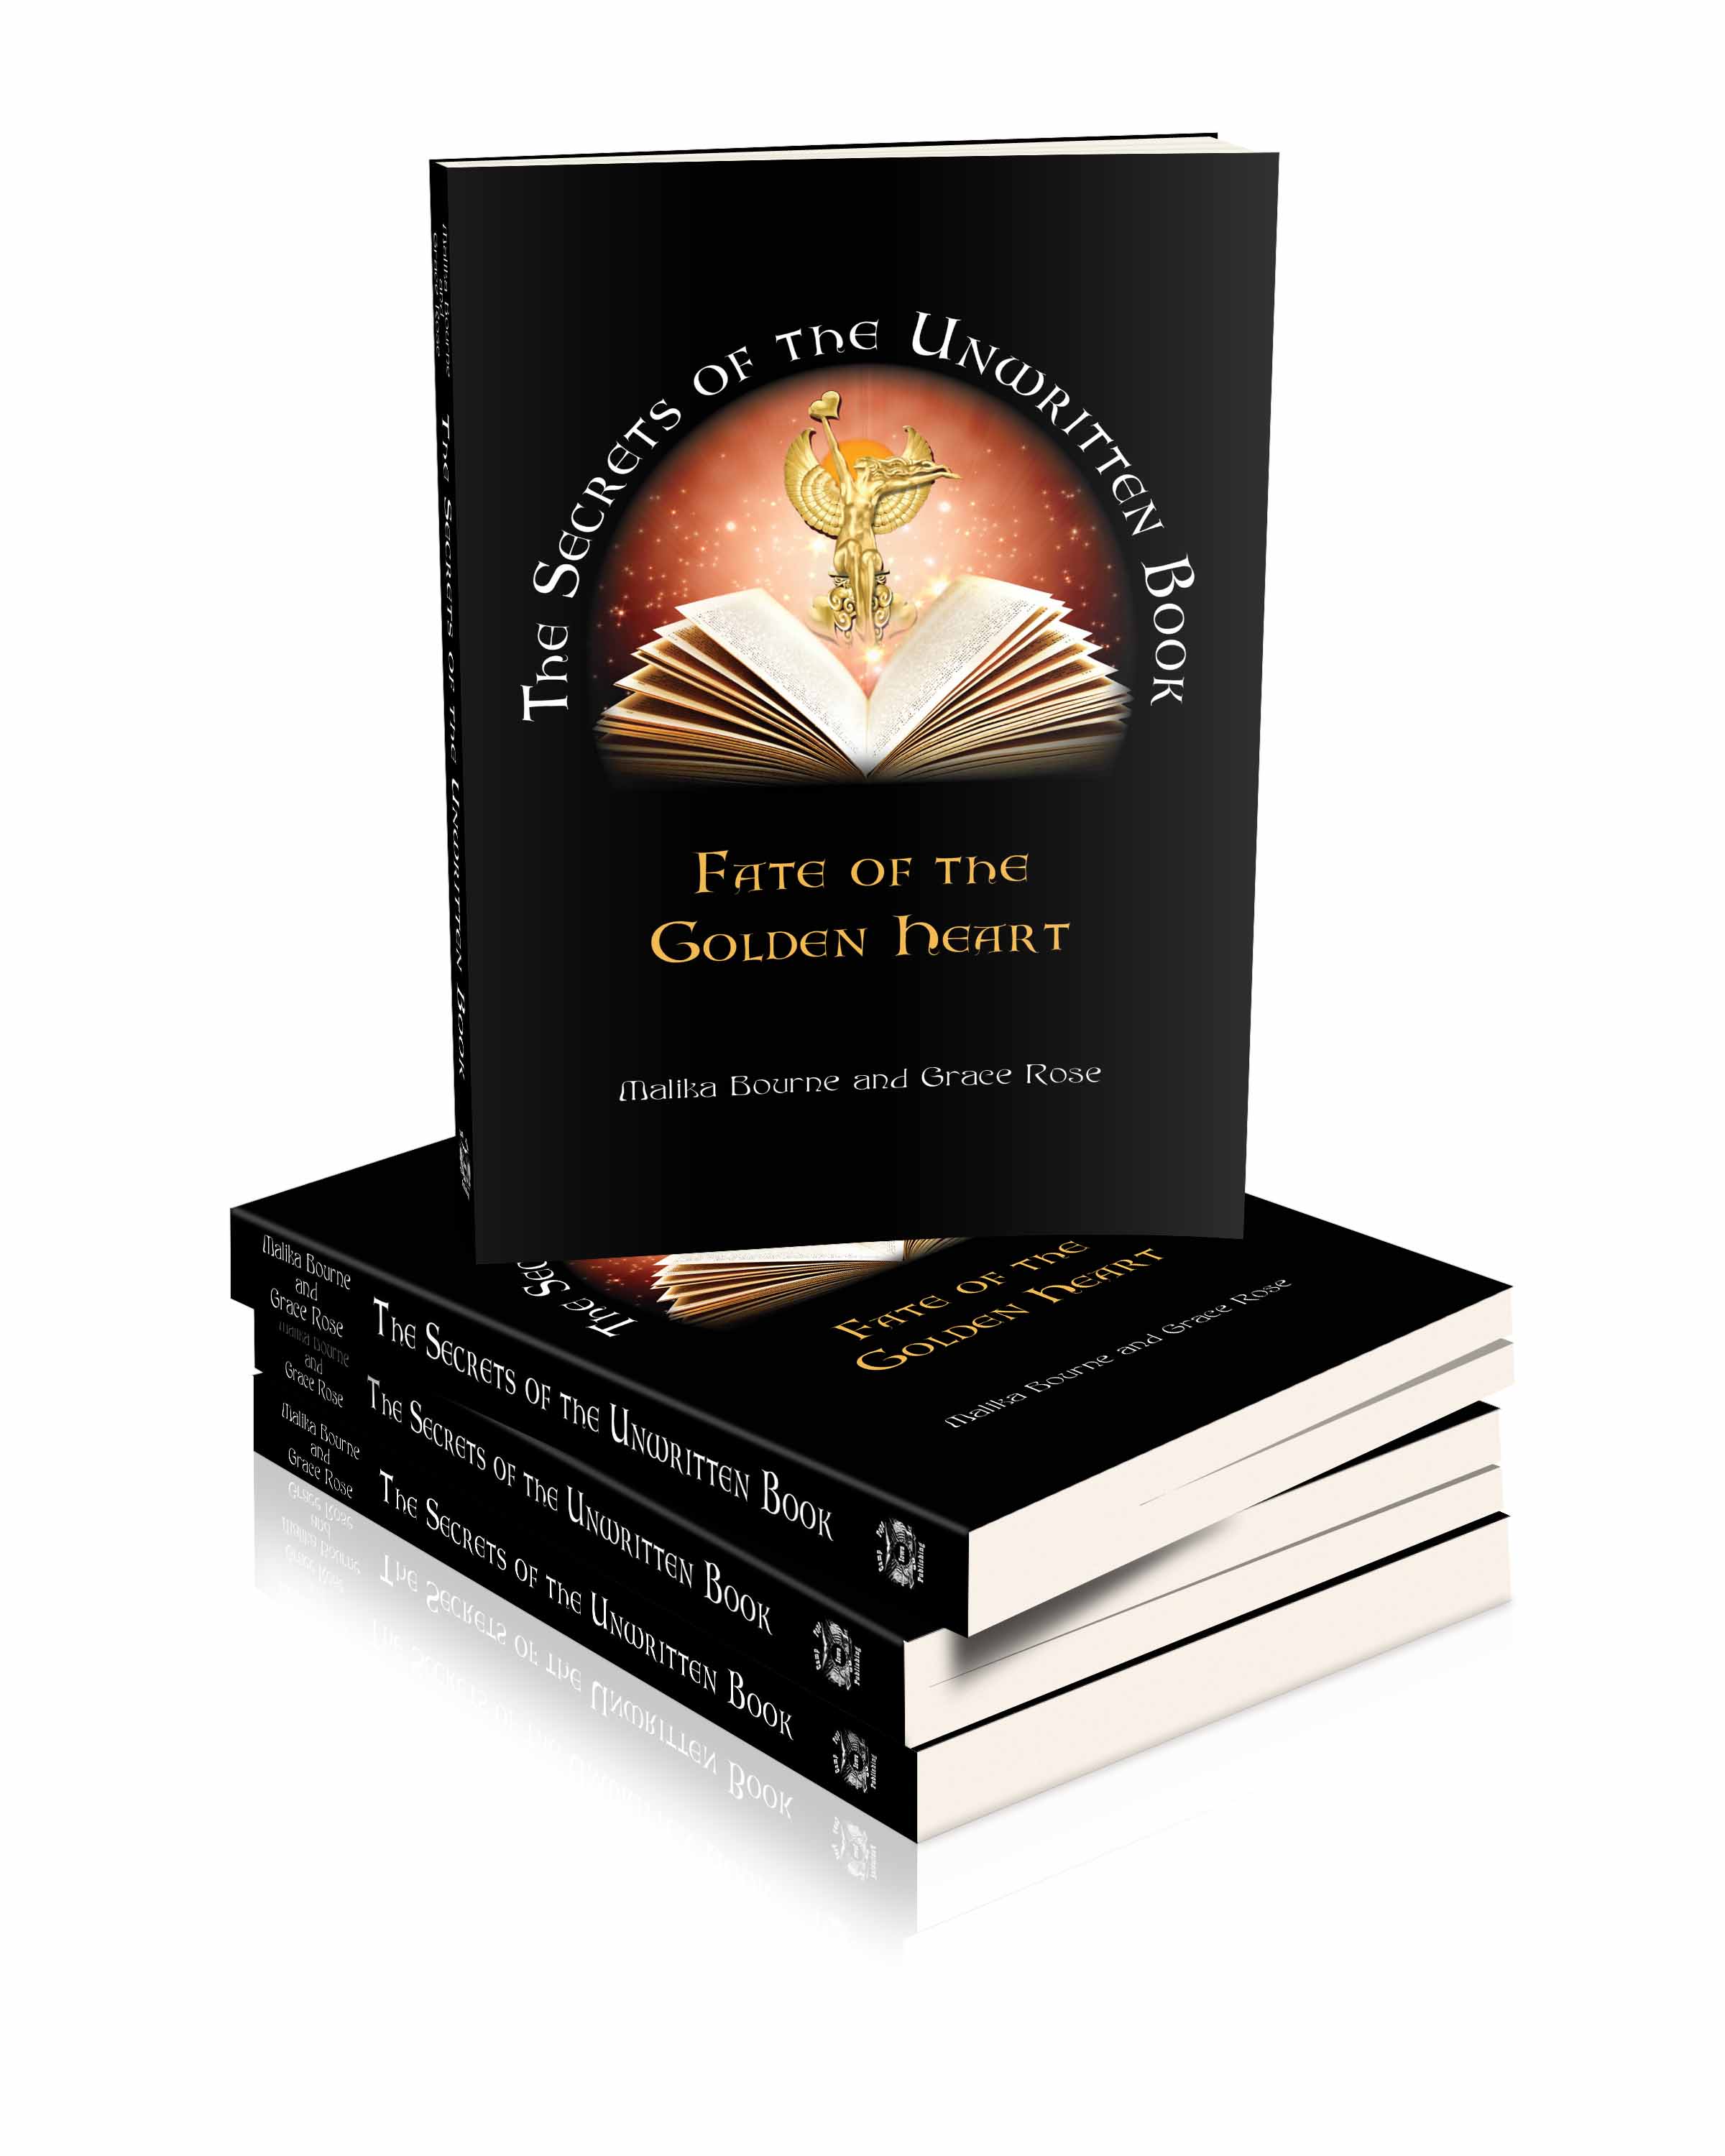 The Secrets of the Unwritten Book: Fate of the Golden Heart